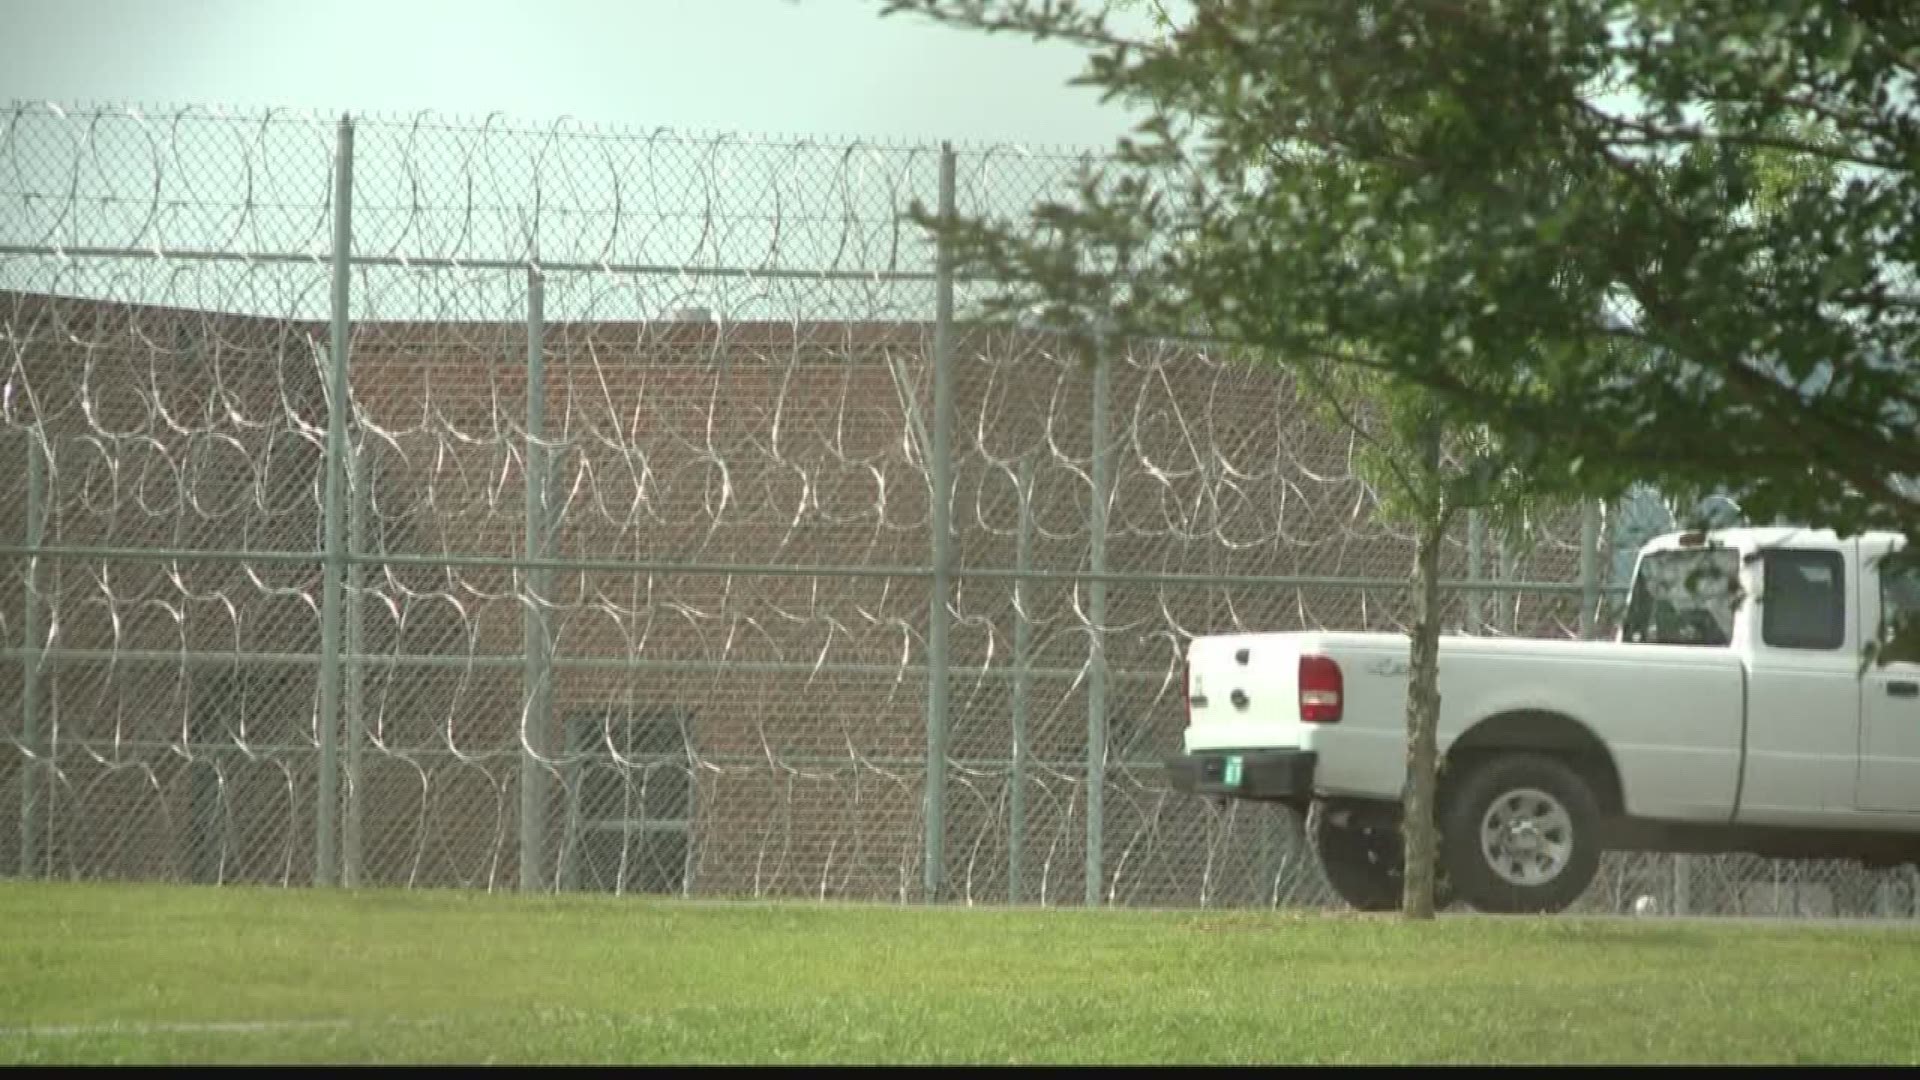 The state has received credible threats about potential security situations at several state prisons.